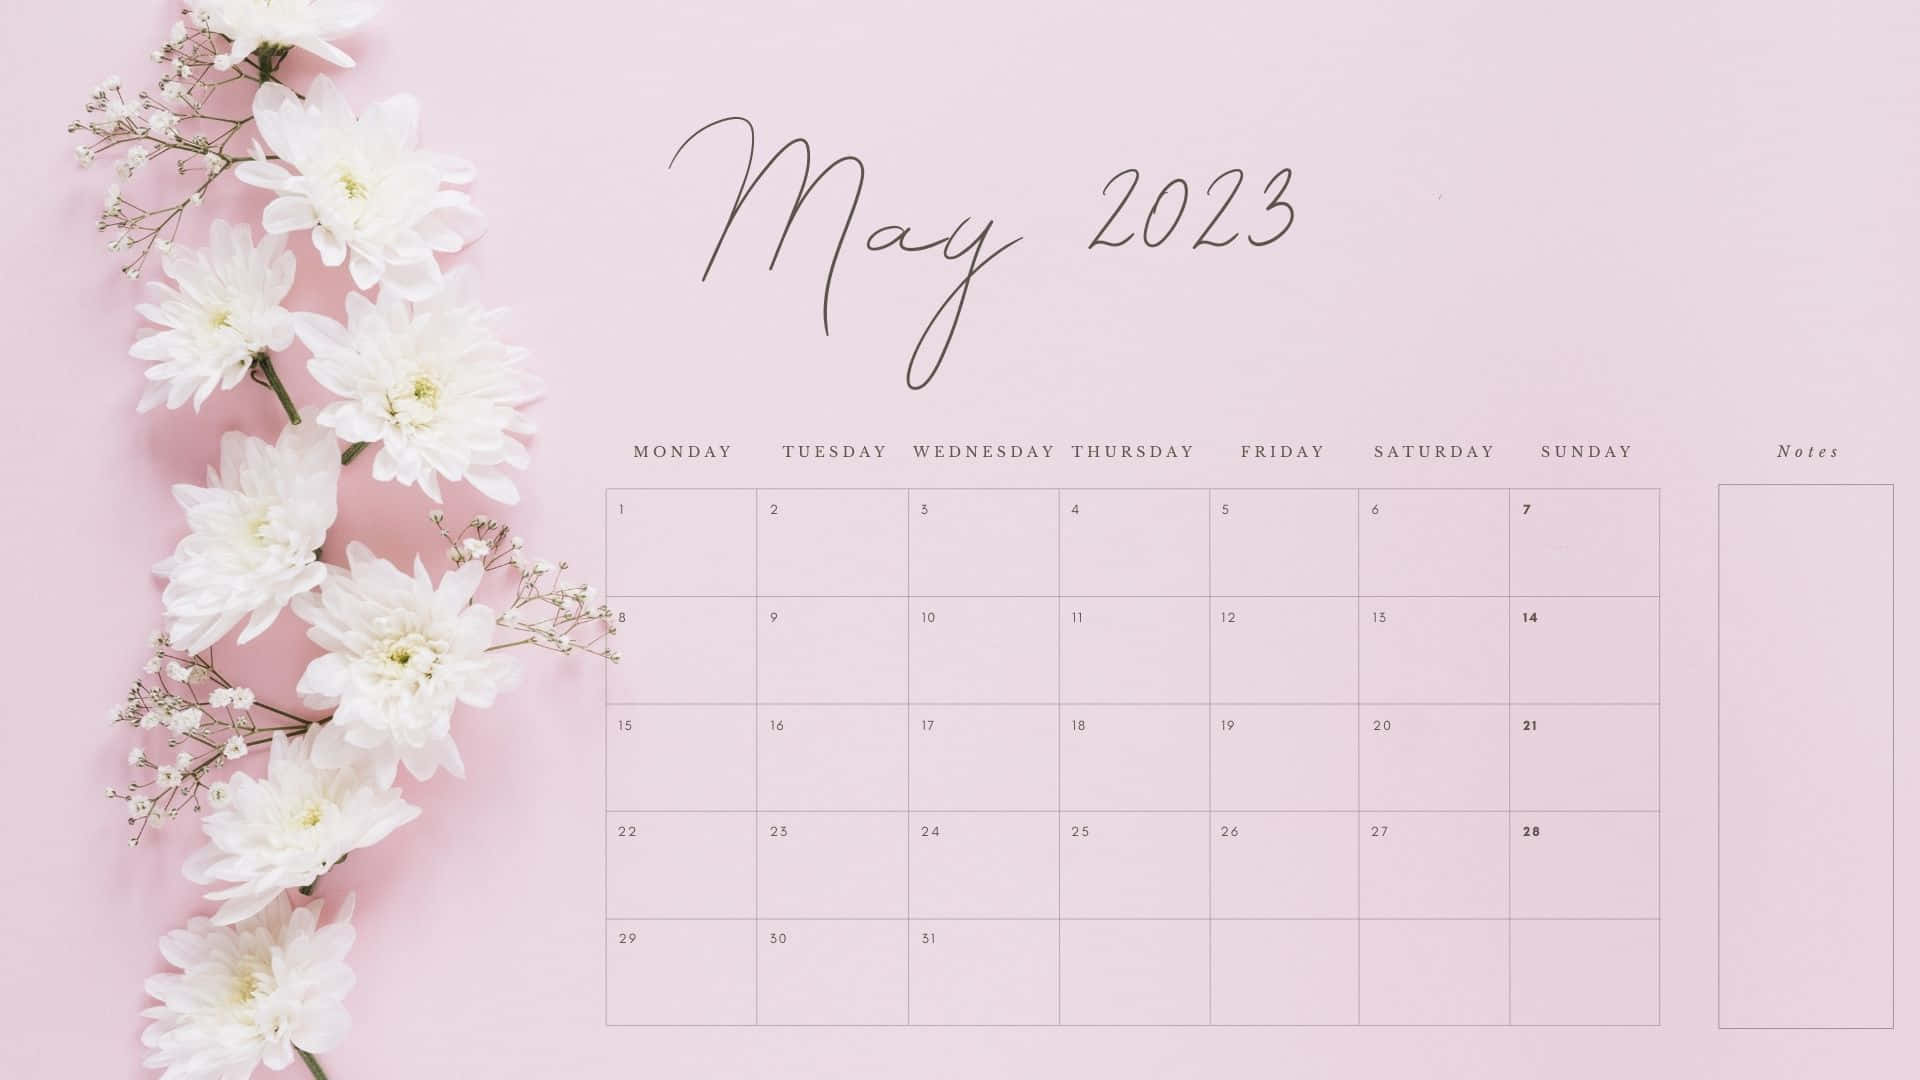 A Pink Calendar With White Flowers On It Wallpaper